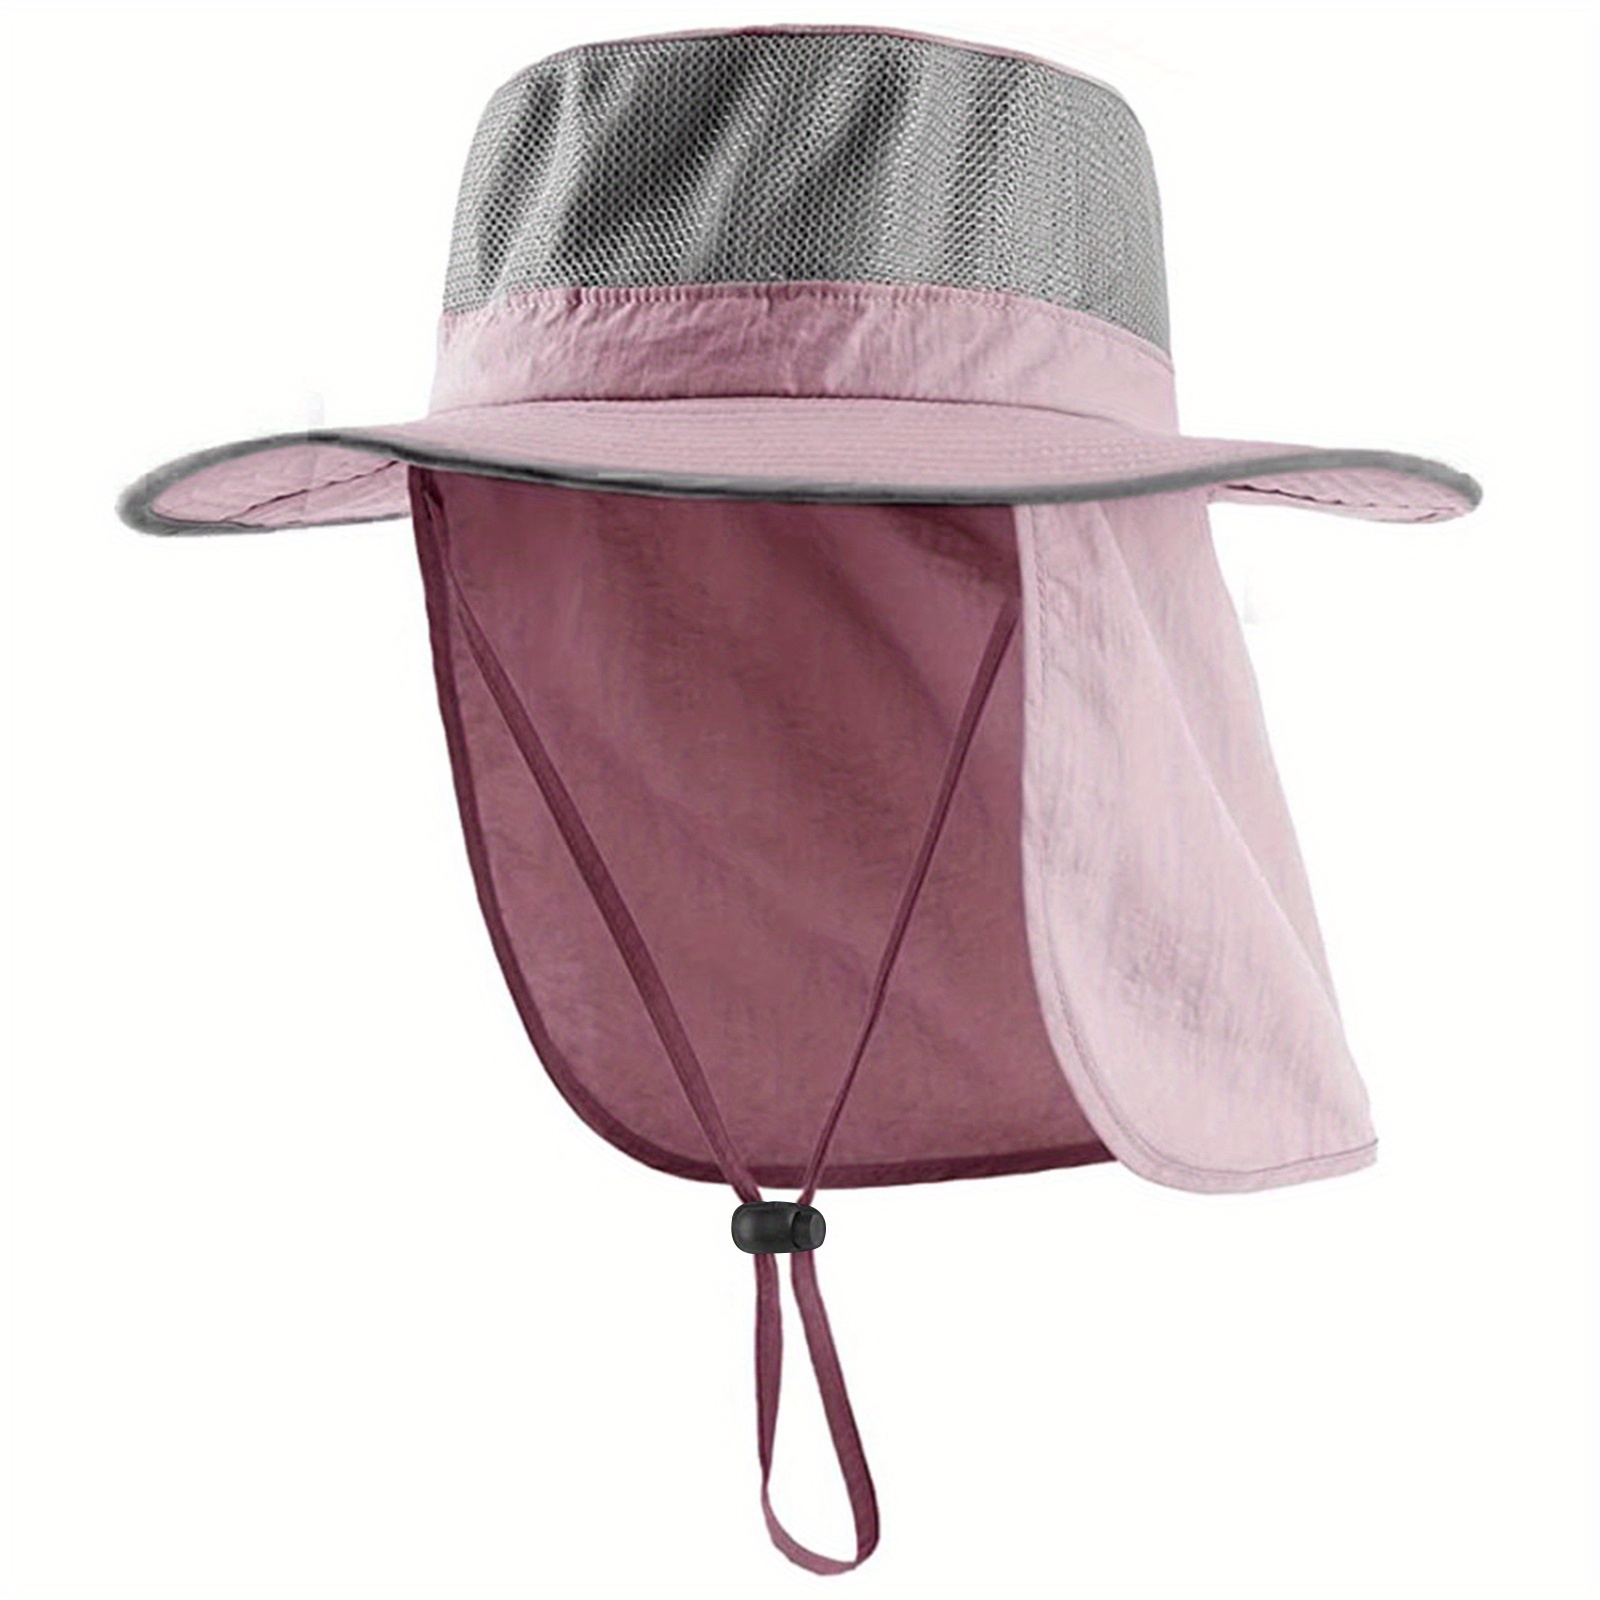 Funky Sun Protection Hat, Men's Hat For Men Wide Brim Hiking Neck Flap Fishing Hat With